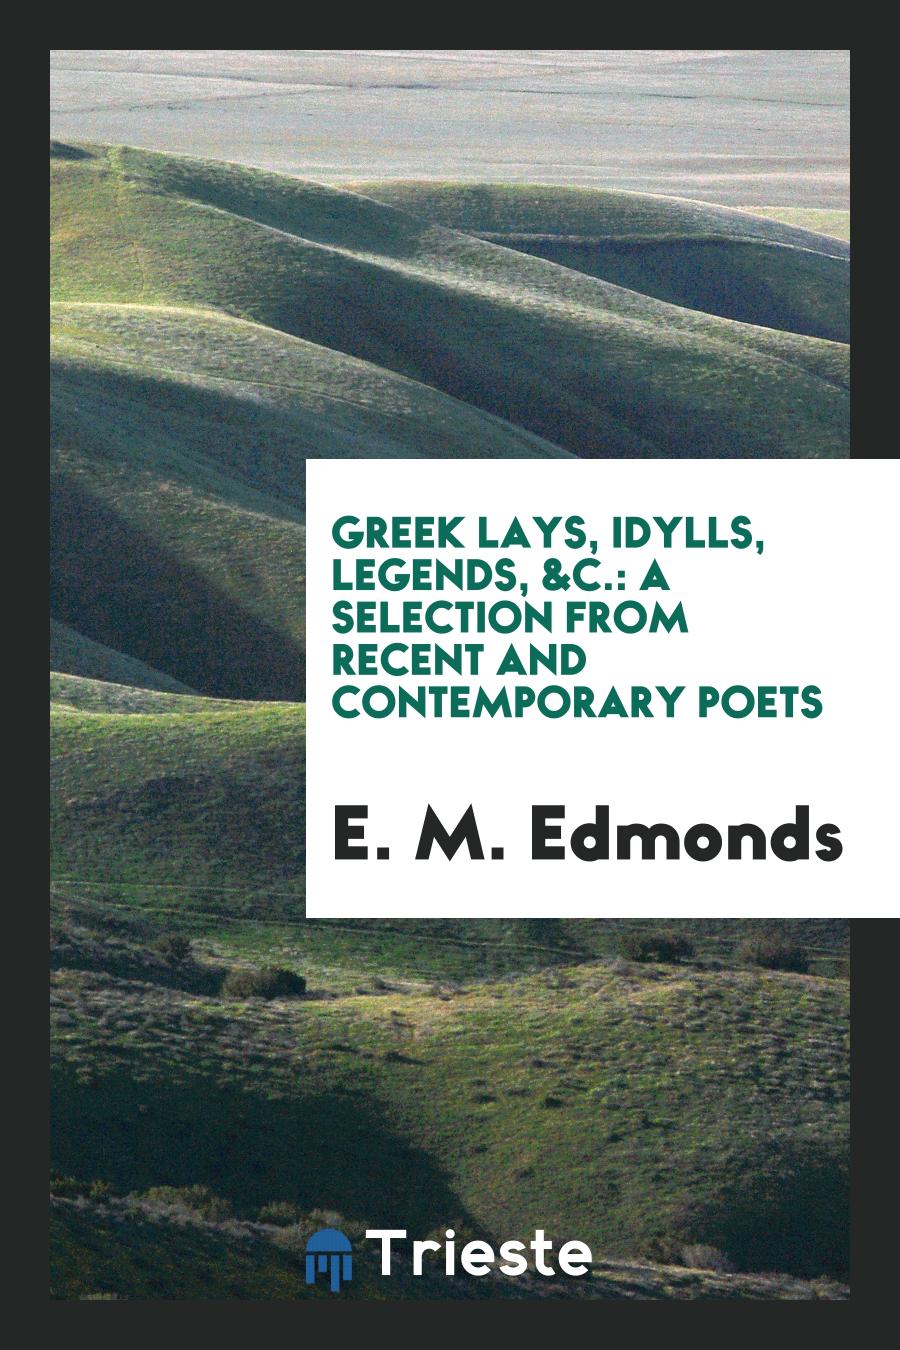 Greek Lays, Idylls, Legends, &c.: A Selection from Recent and Contemporary Poets